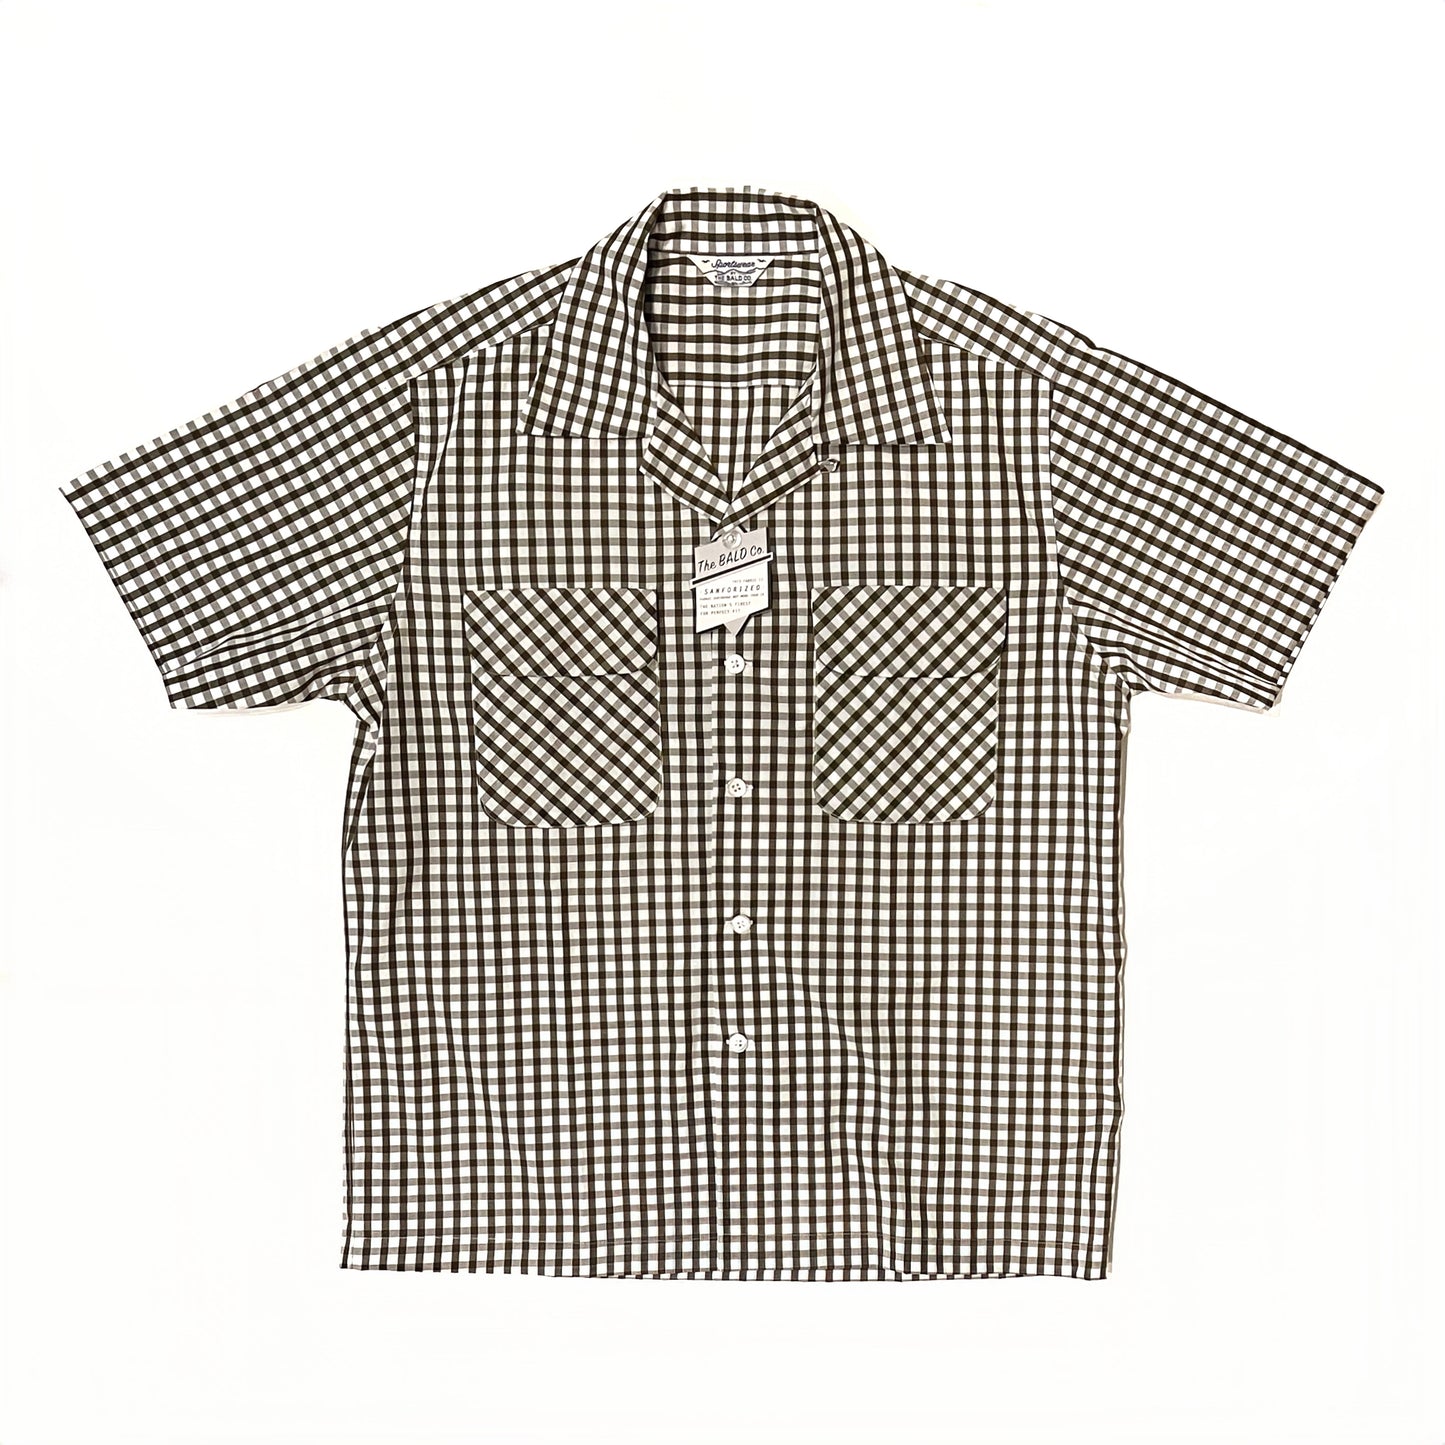 THE BALD CO. - Open Collar Shirt (Olive White)